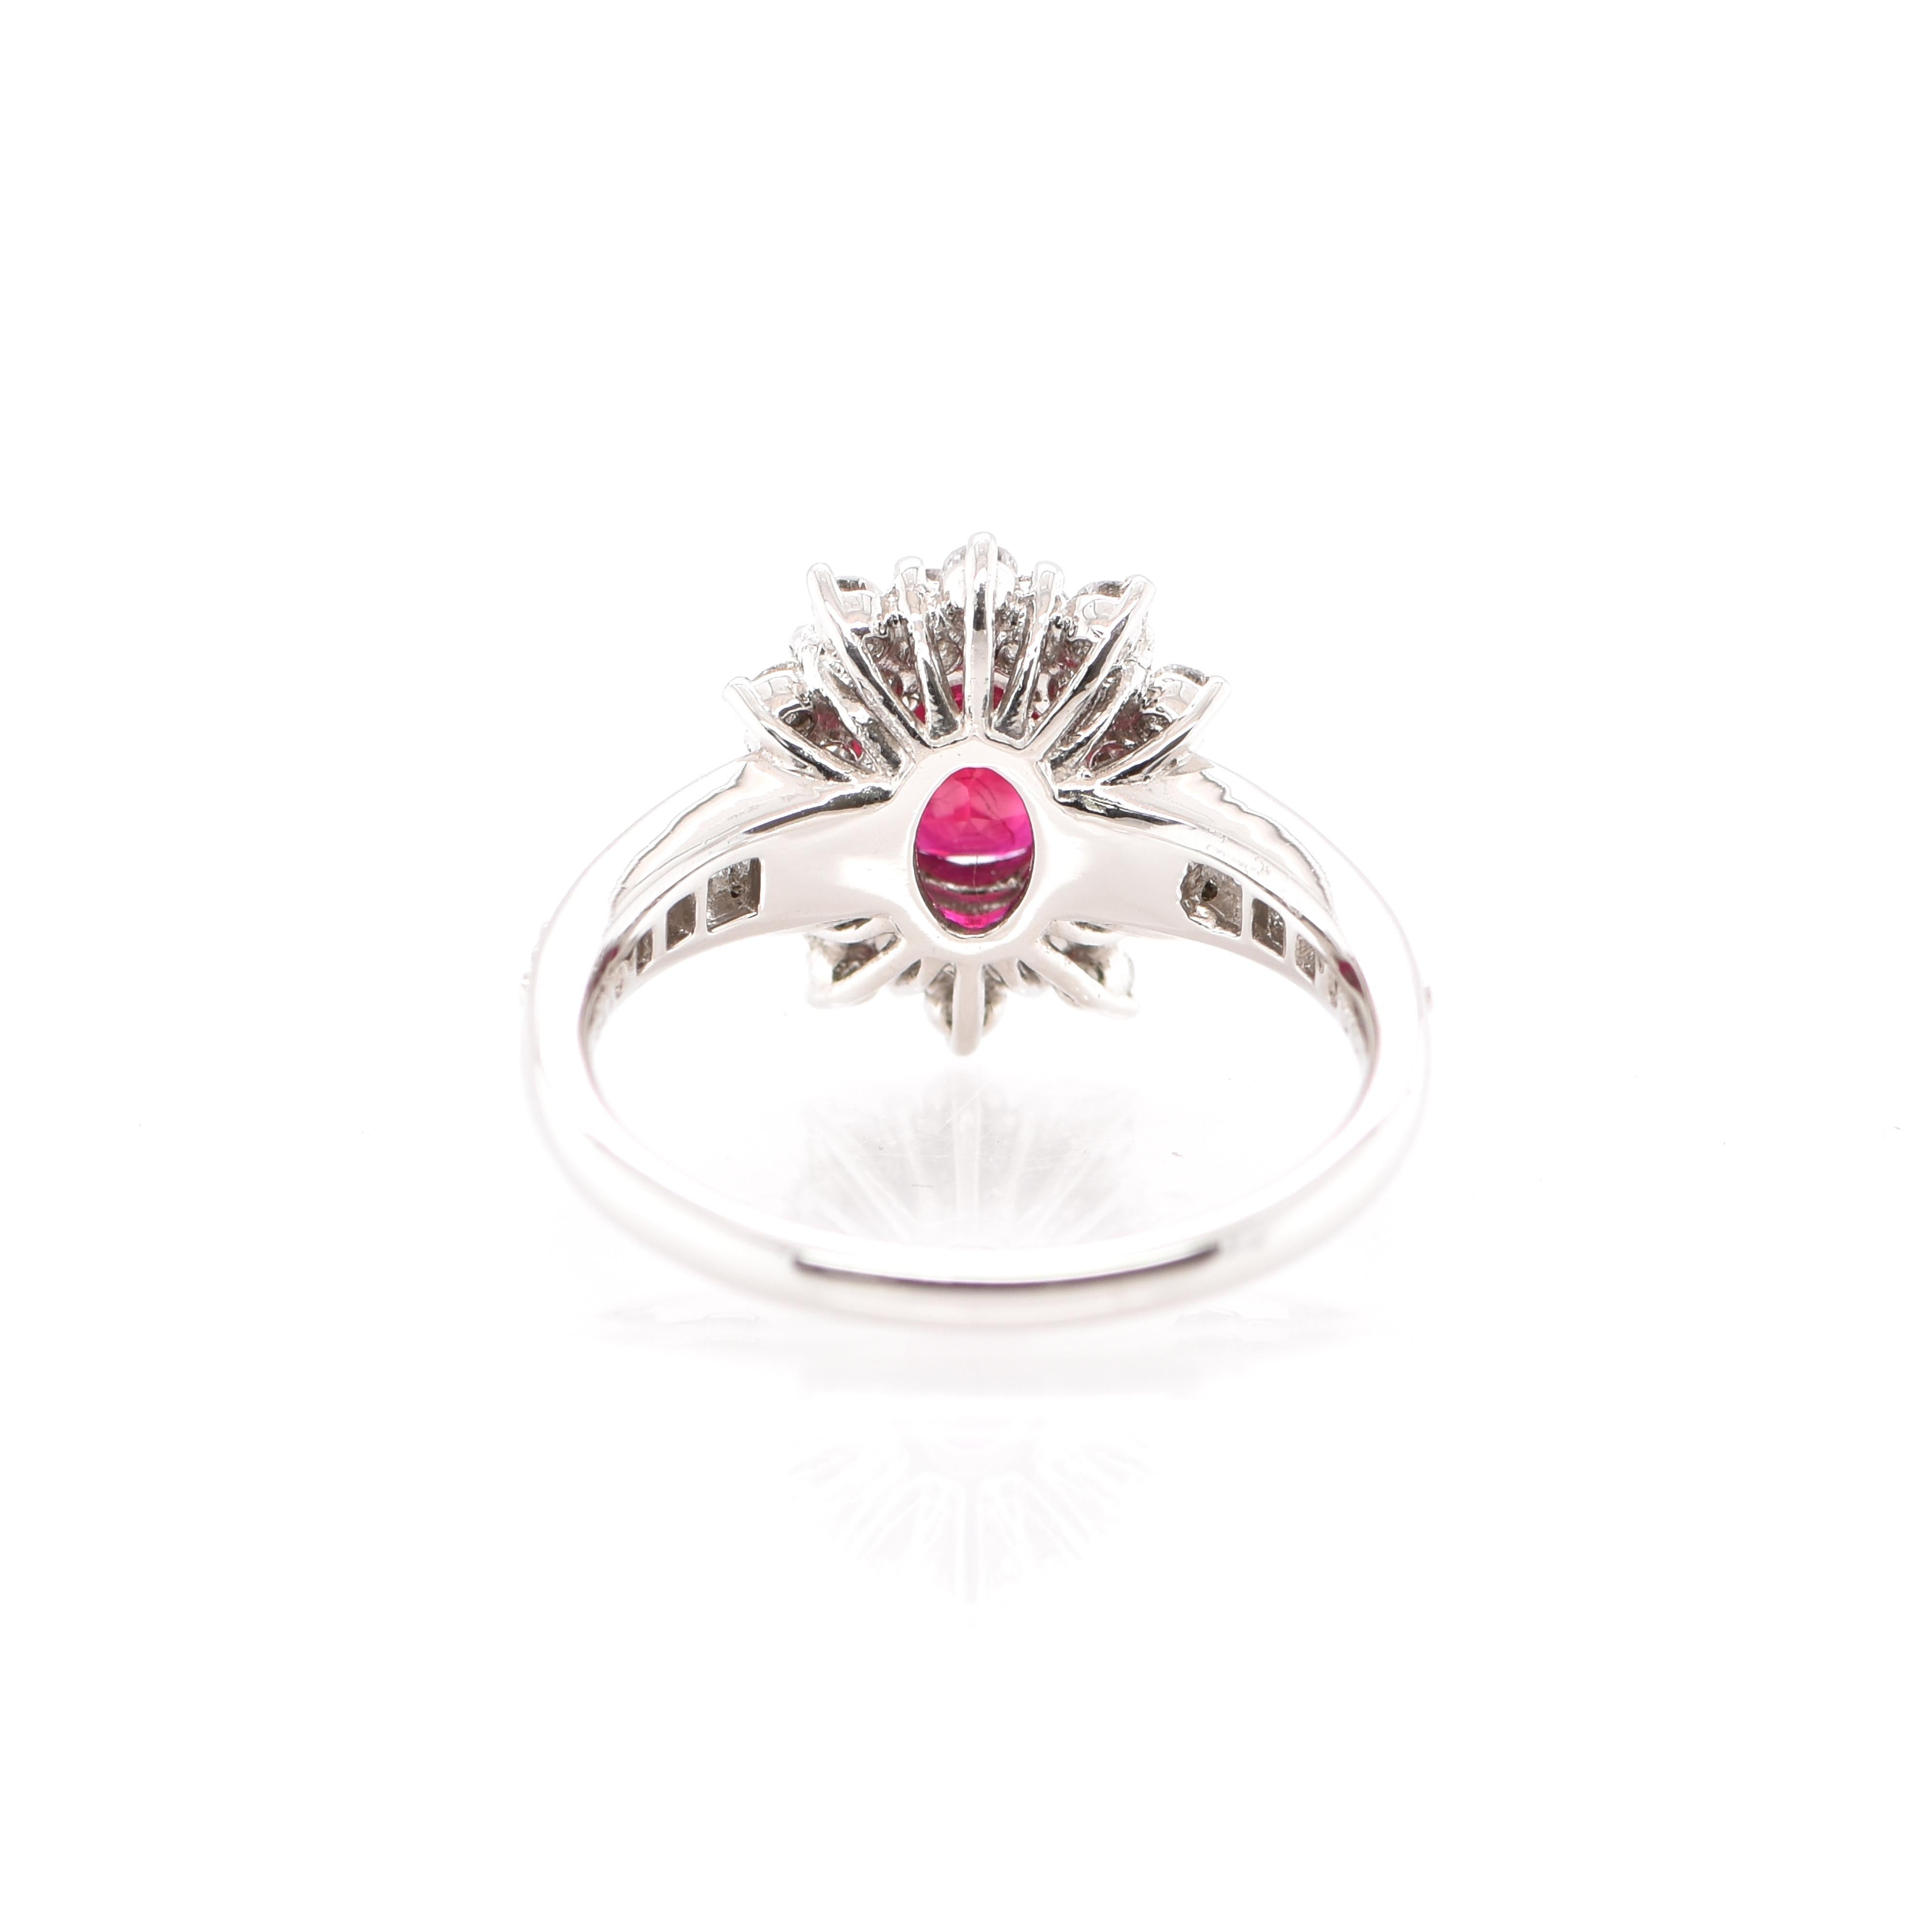 A beautiful Halo Ring featuring a stunning 1.137 Carat Ruby and 0.73 Carats of Diamond Accents set in Platinum. The Ruby exhibits great color and luster. Rubies are referred to as 